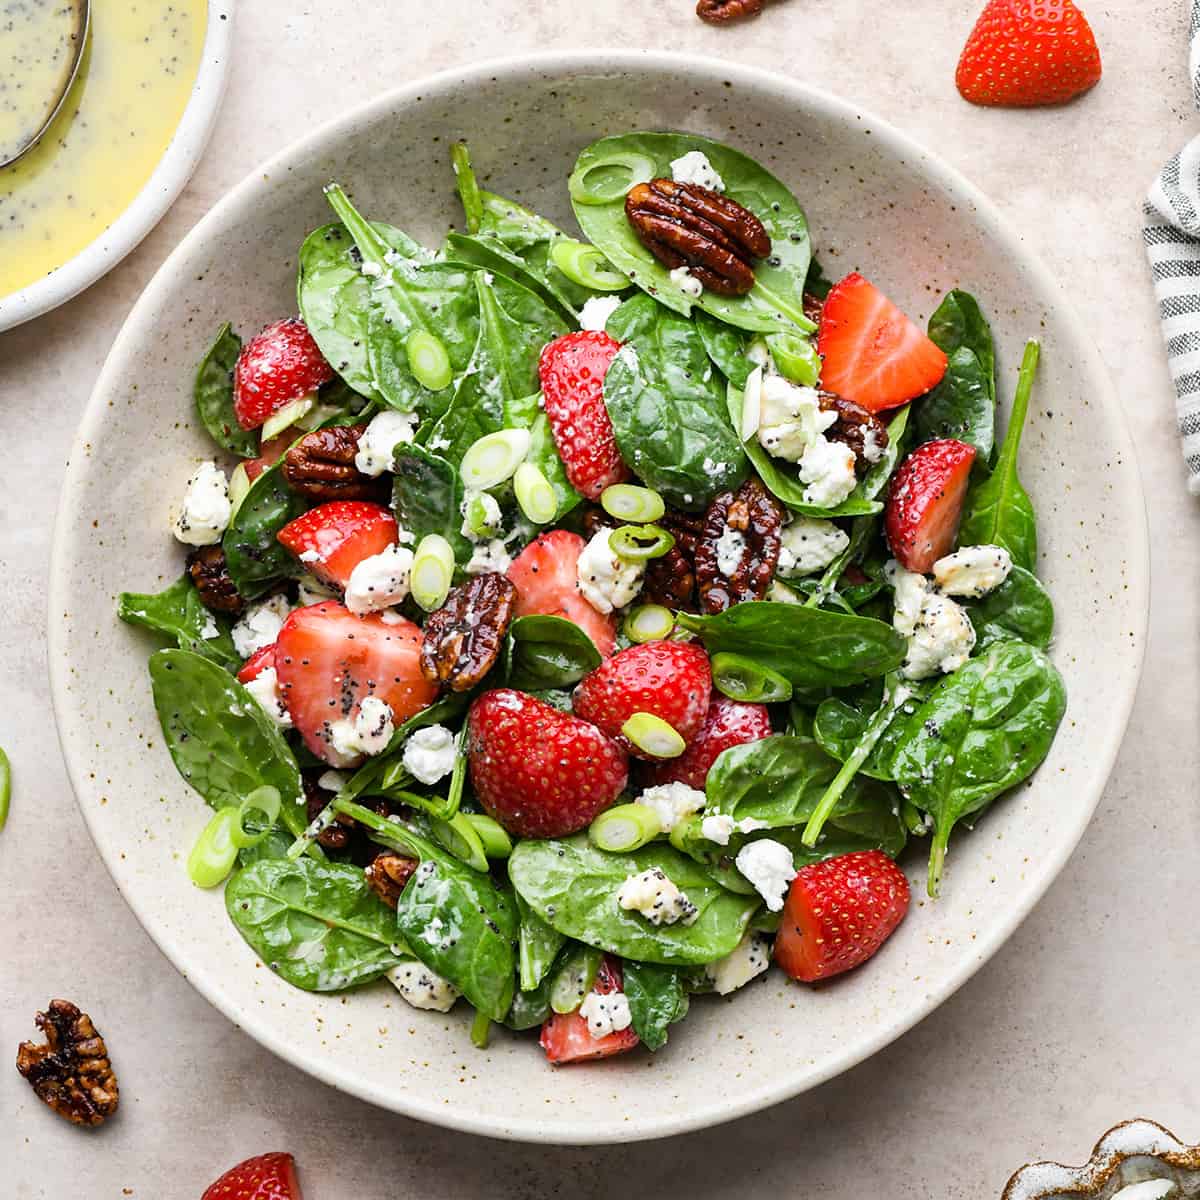 Strawberry Spinach Salad Recipe in a bowl